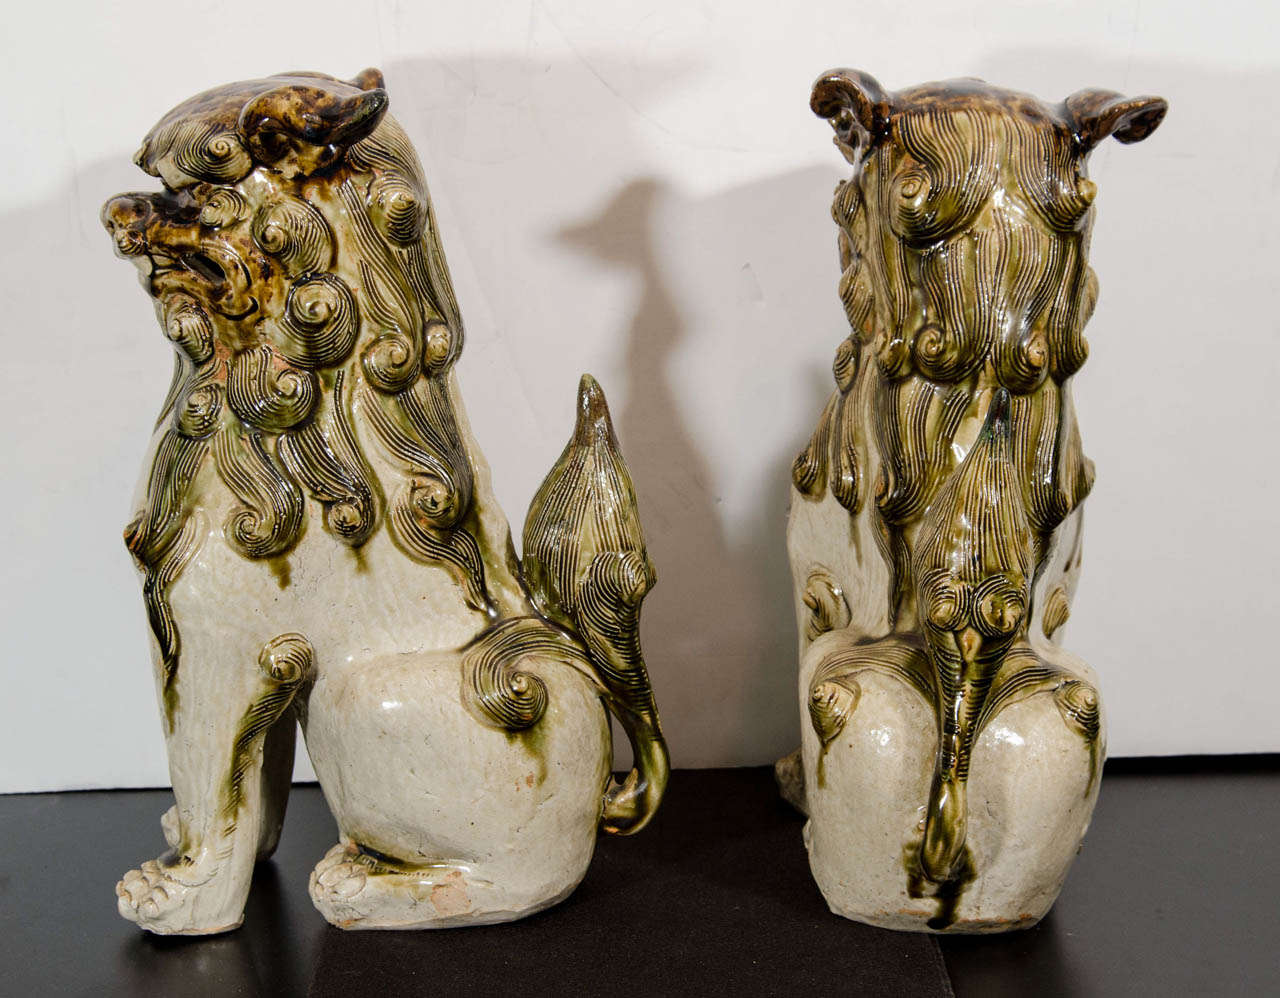 A pair of sculptural Japanese Foo Dogs made of Oribe porcelain from the late Edo Period.

Good condition with age appropriate wear.